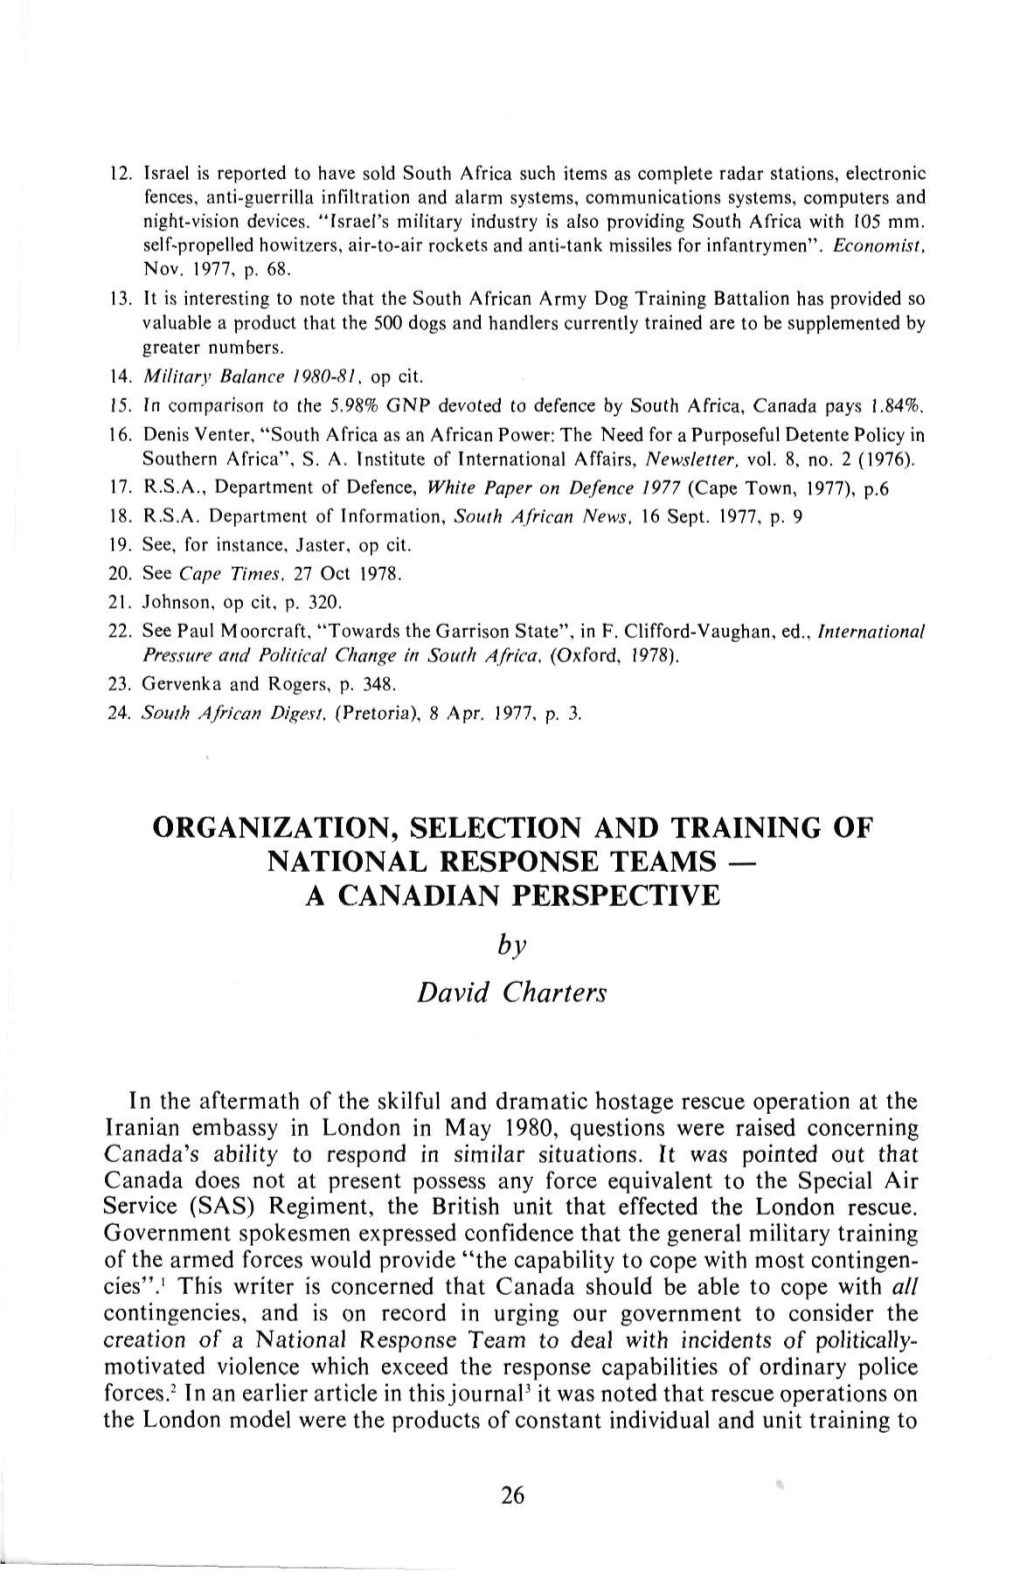 ORGANIZATION, SELECTION and TRAINING of NATIONAL RESPONSE TEAMS — a CANADIAN PERSPECTIVE by David Charters